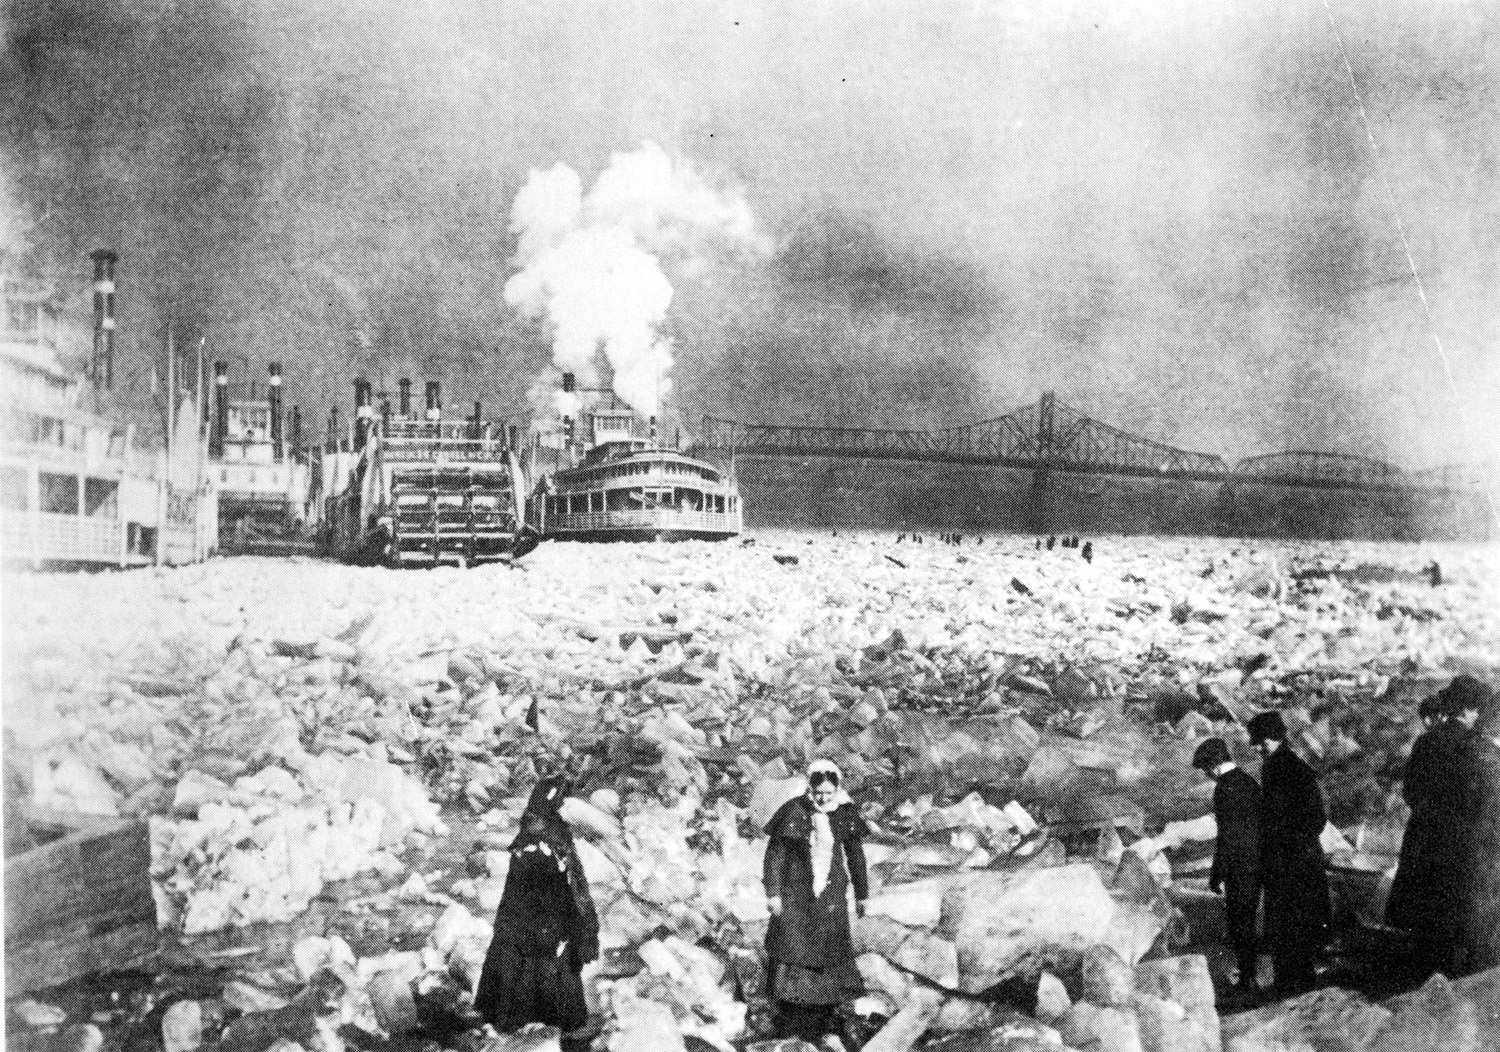 100 Years Ago: Ice Wreaked Havoc Throughout River System